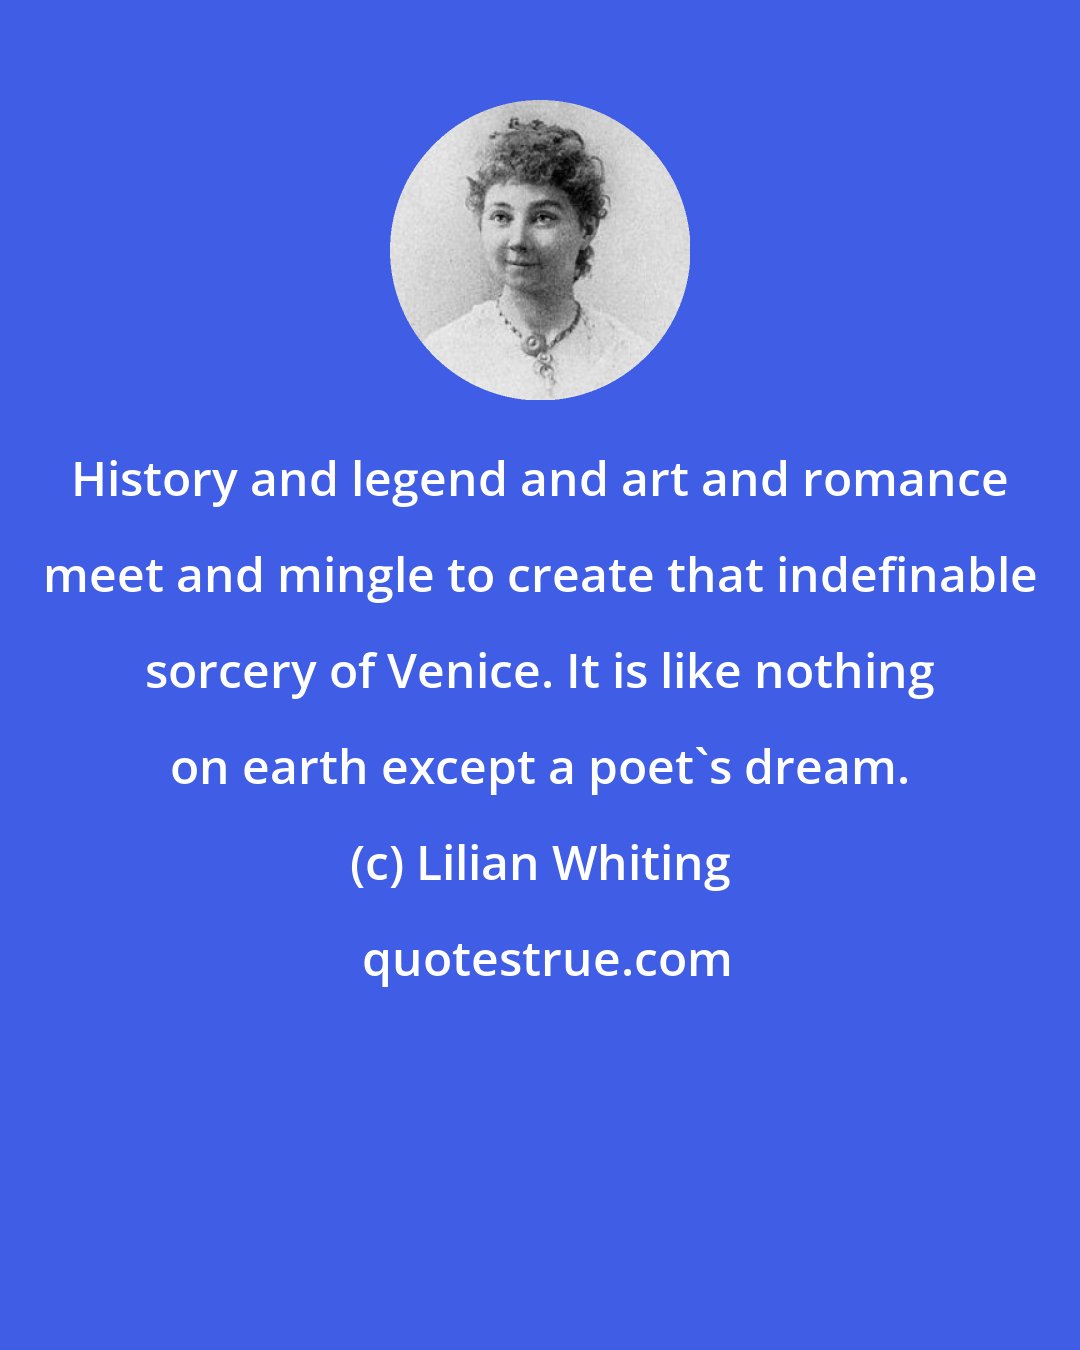 Lilian Whiting: History and legend and art and romance meet and mingle to create that indefinable sorcery of Venice. It is like nothing on earth except a poet's dream.